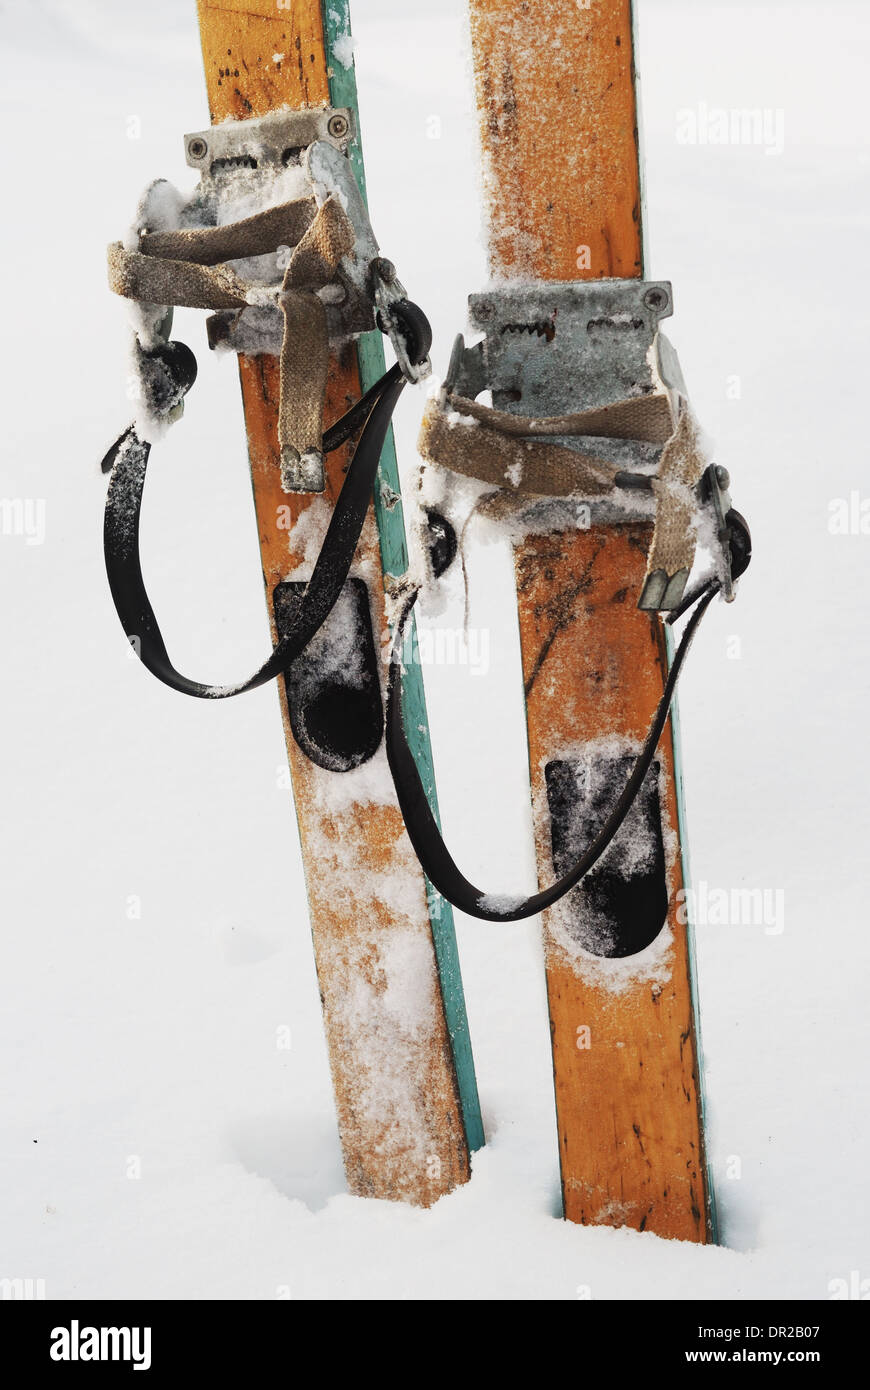 old wooden skis in the snow, vertical Stock Photo